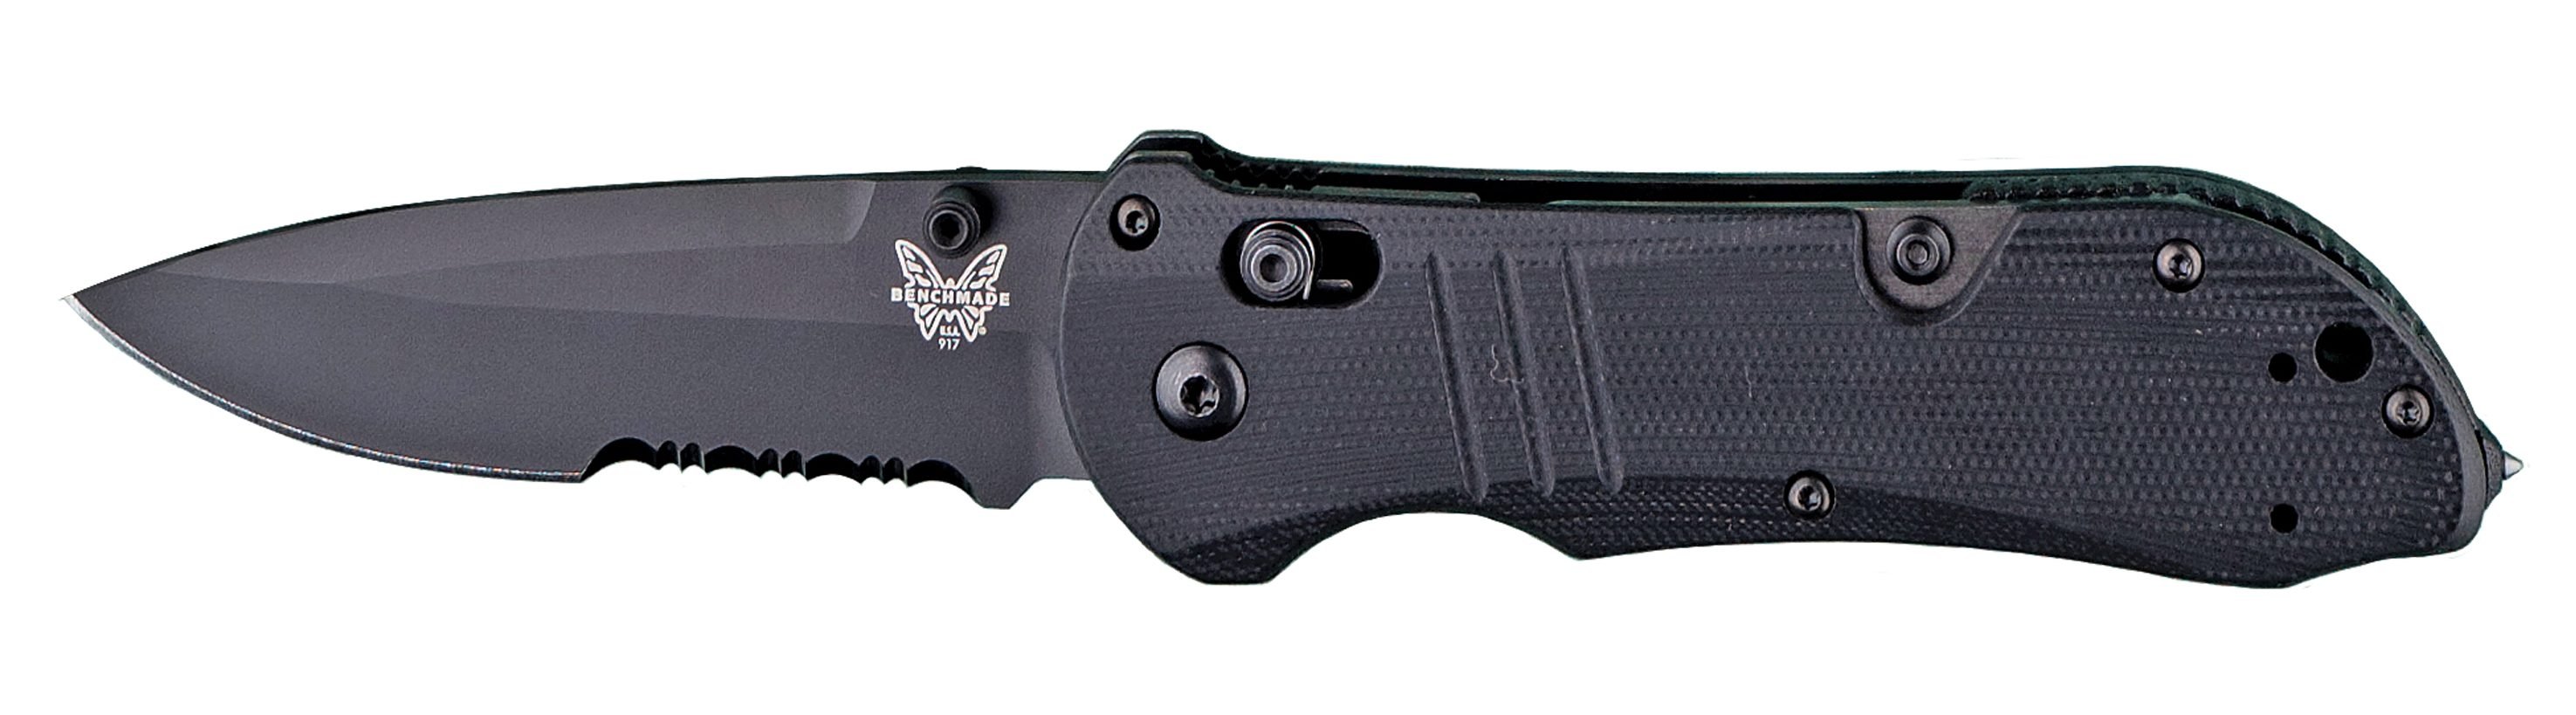 Benchmade Tactical Triage pocketknife